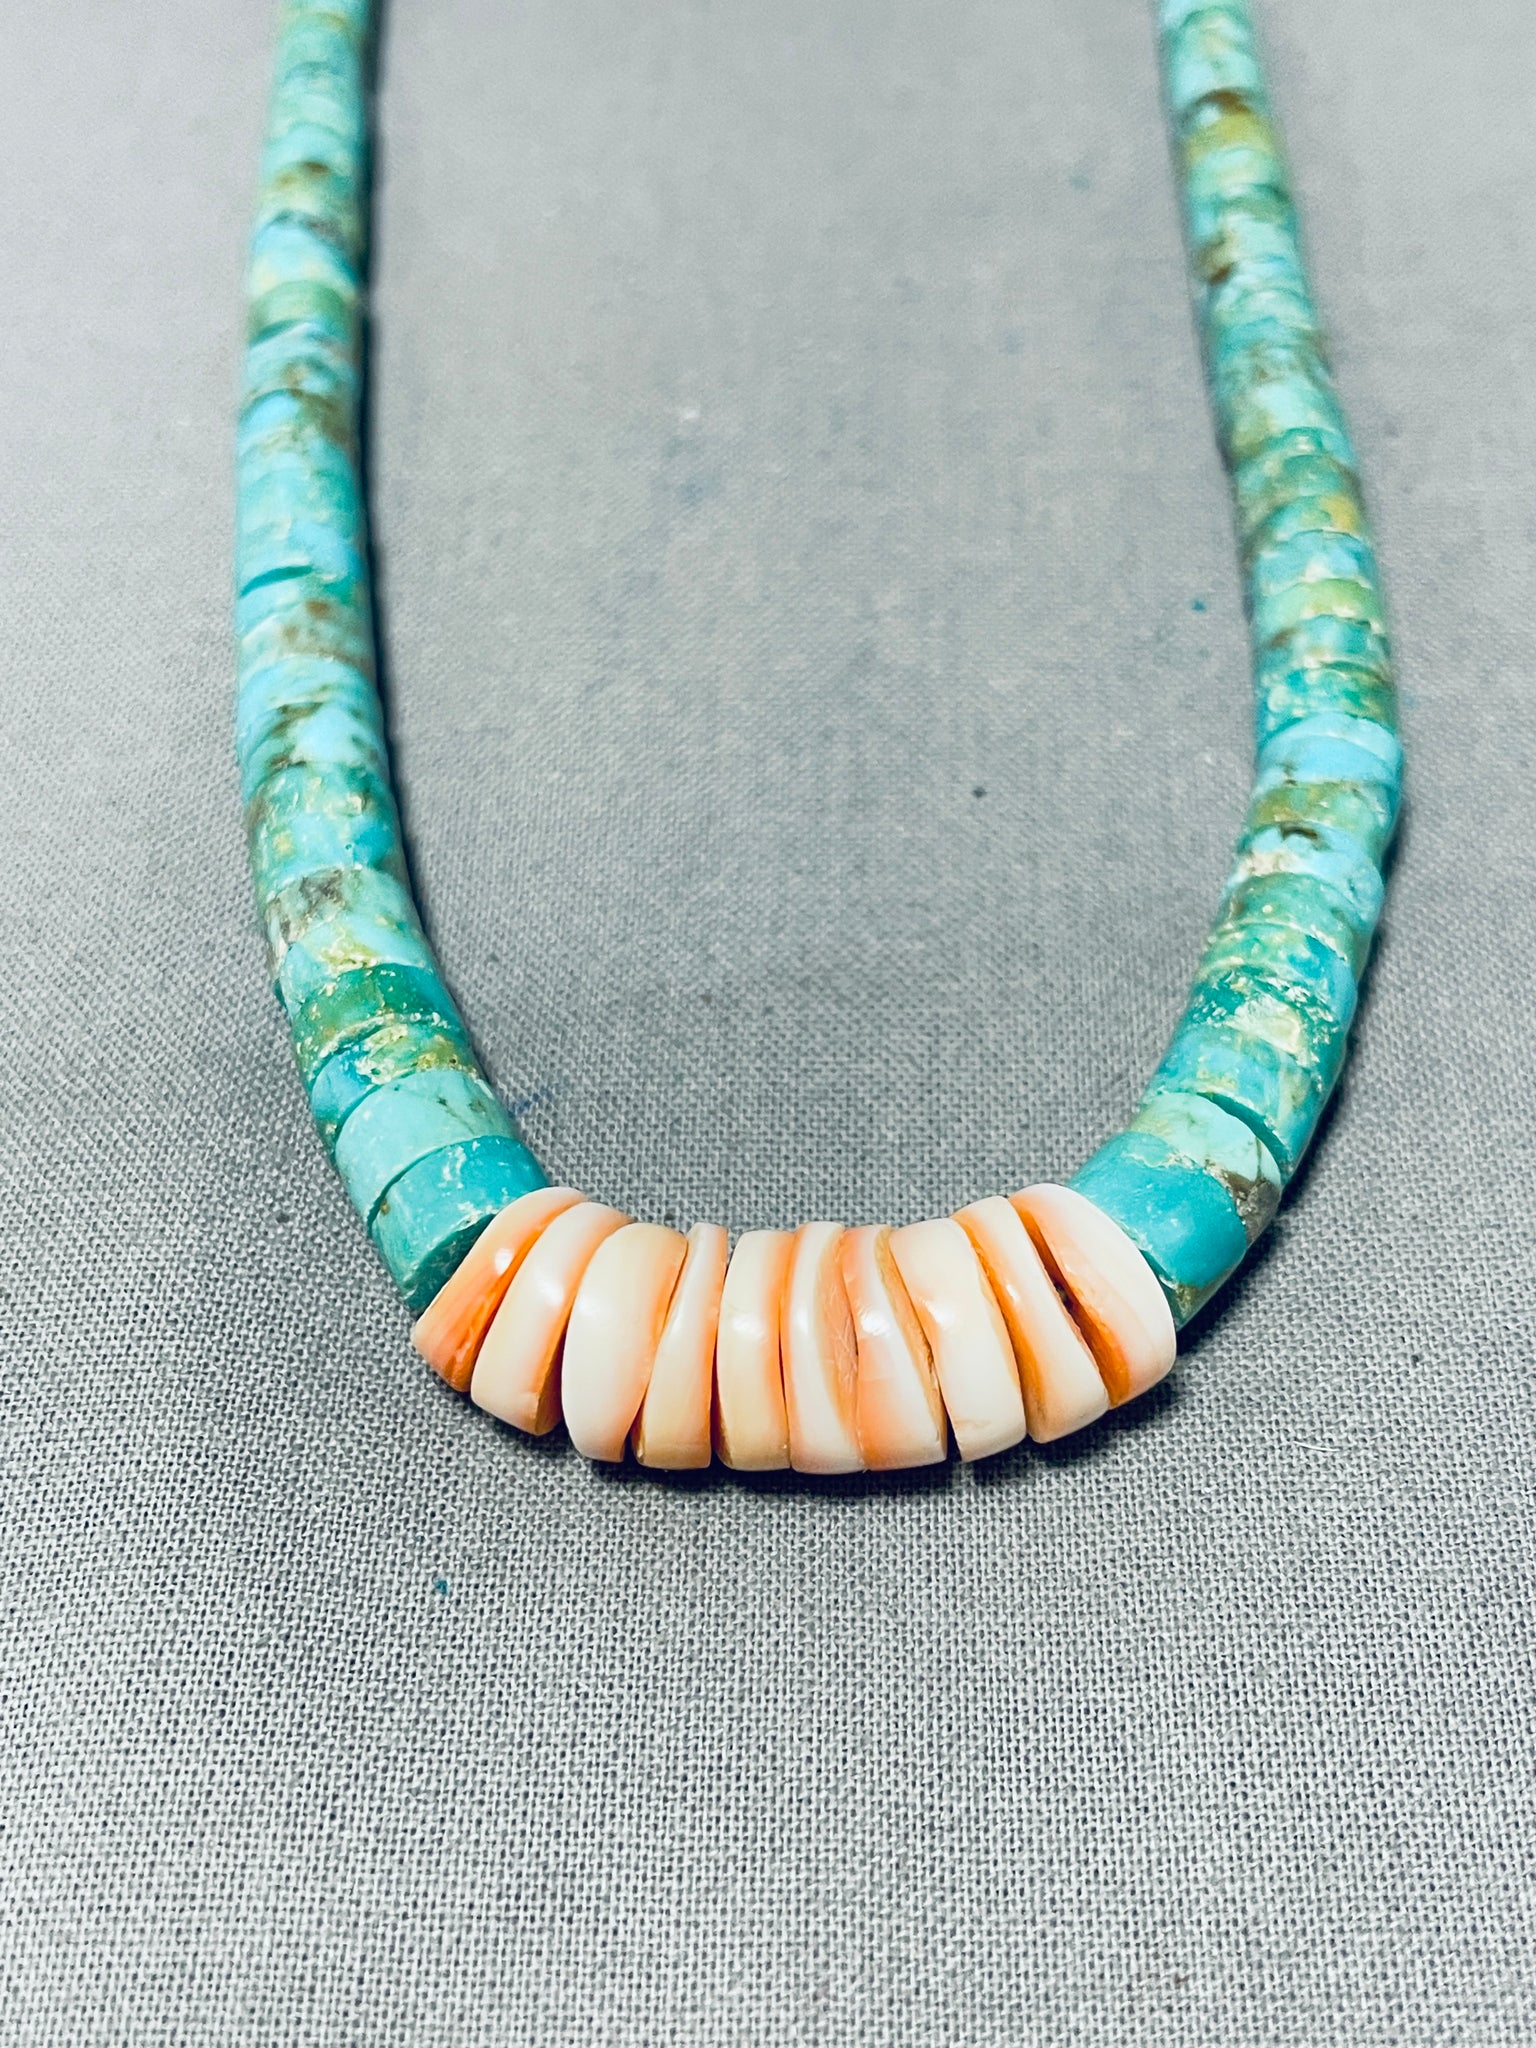 Native American Jewelry Five Strand Turquoise Necklace - PuebloDirect.com